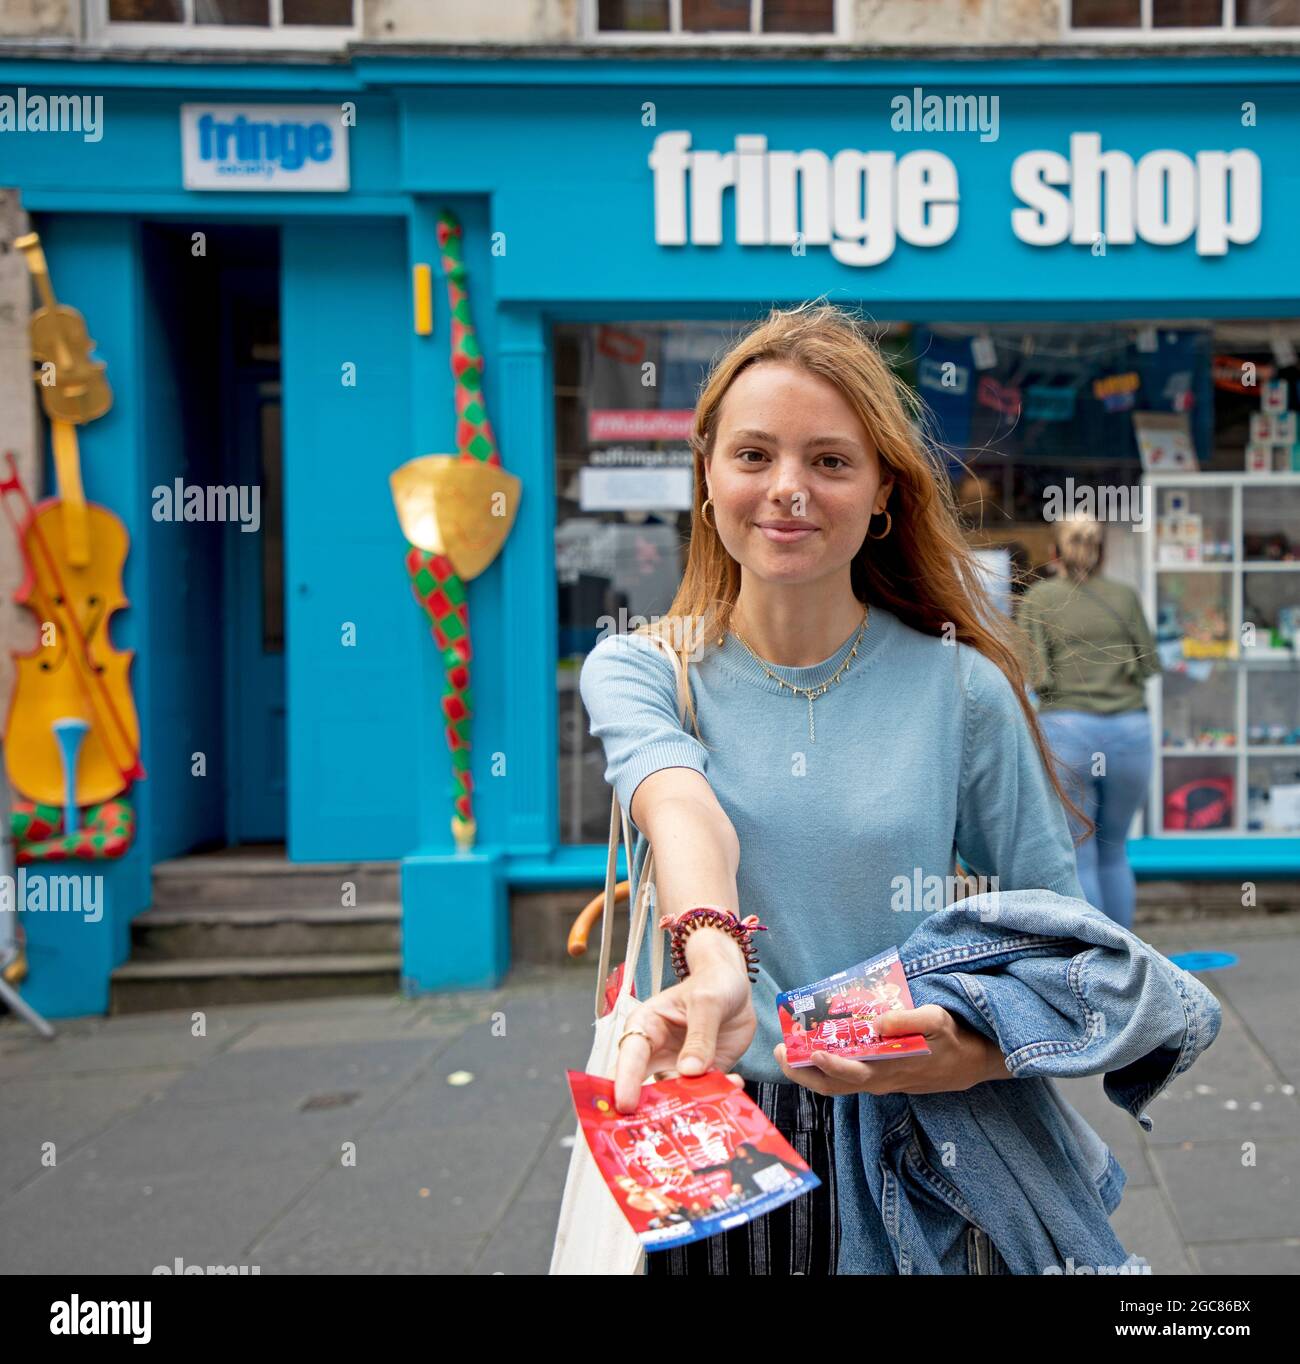 Edinburgh, Scotland, UK. 7th August 2021. A busier day for   second day of Edinburgh Fringe Festival in Royal Mile.Ember, one of the few people handing out flyers for a show, Theatre 19 Present: JOHN  theSpace@Sugeons Hall. Credit: Arch White/Alamy Live News. Stock Photo